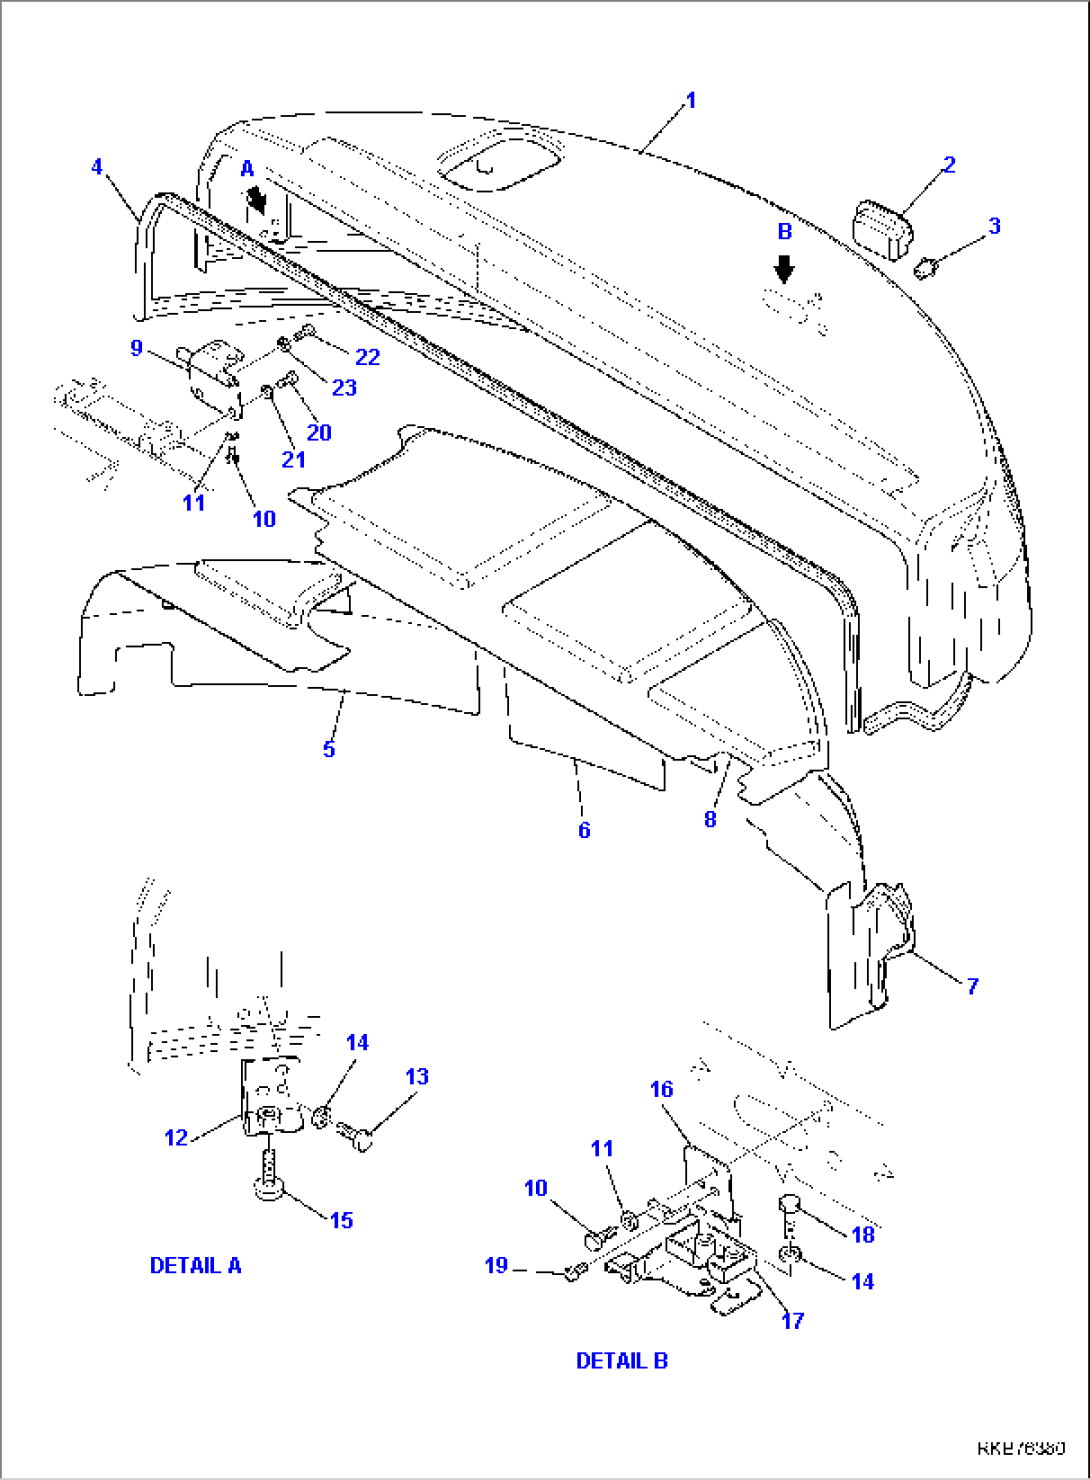 ENGINE SIDE COVERS (1/2)